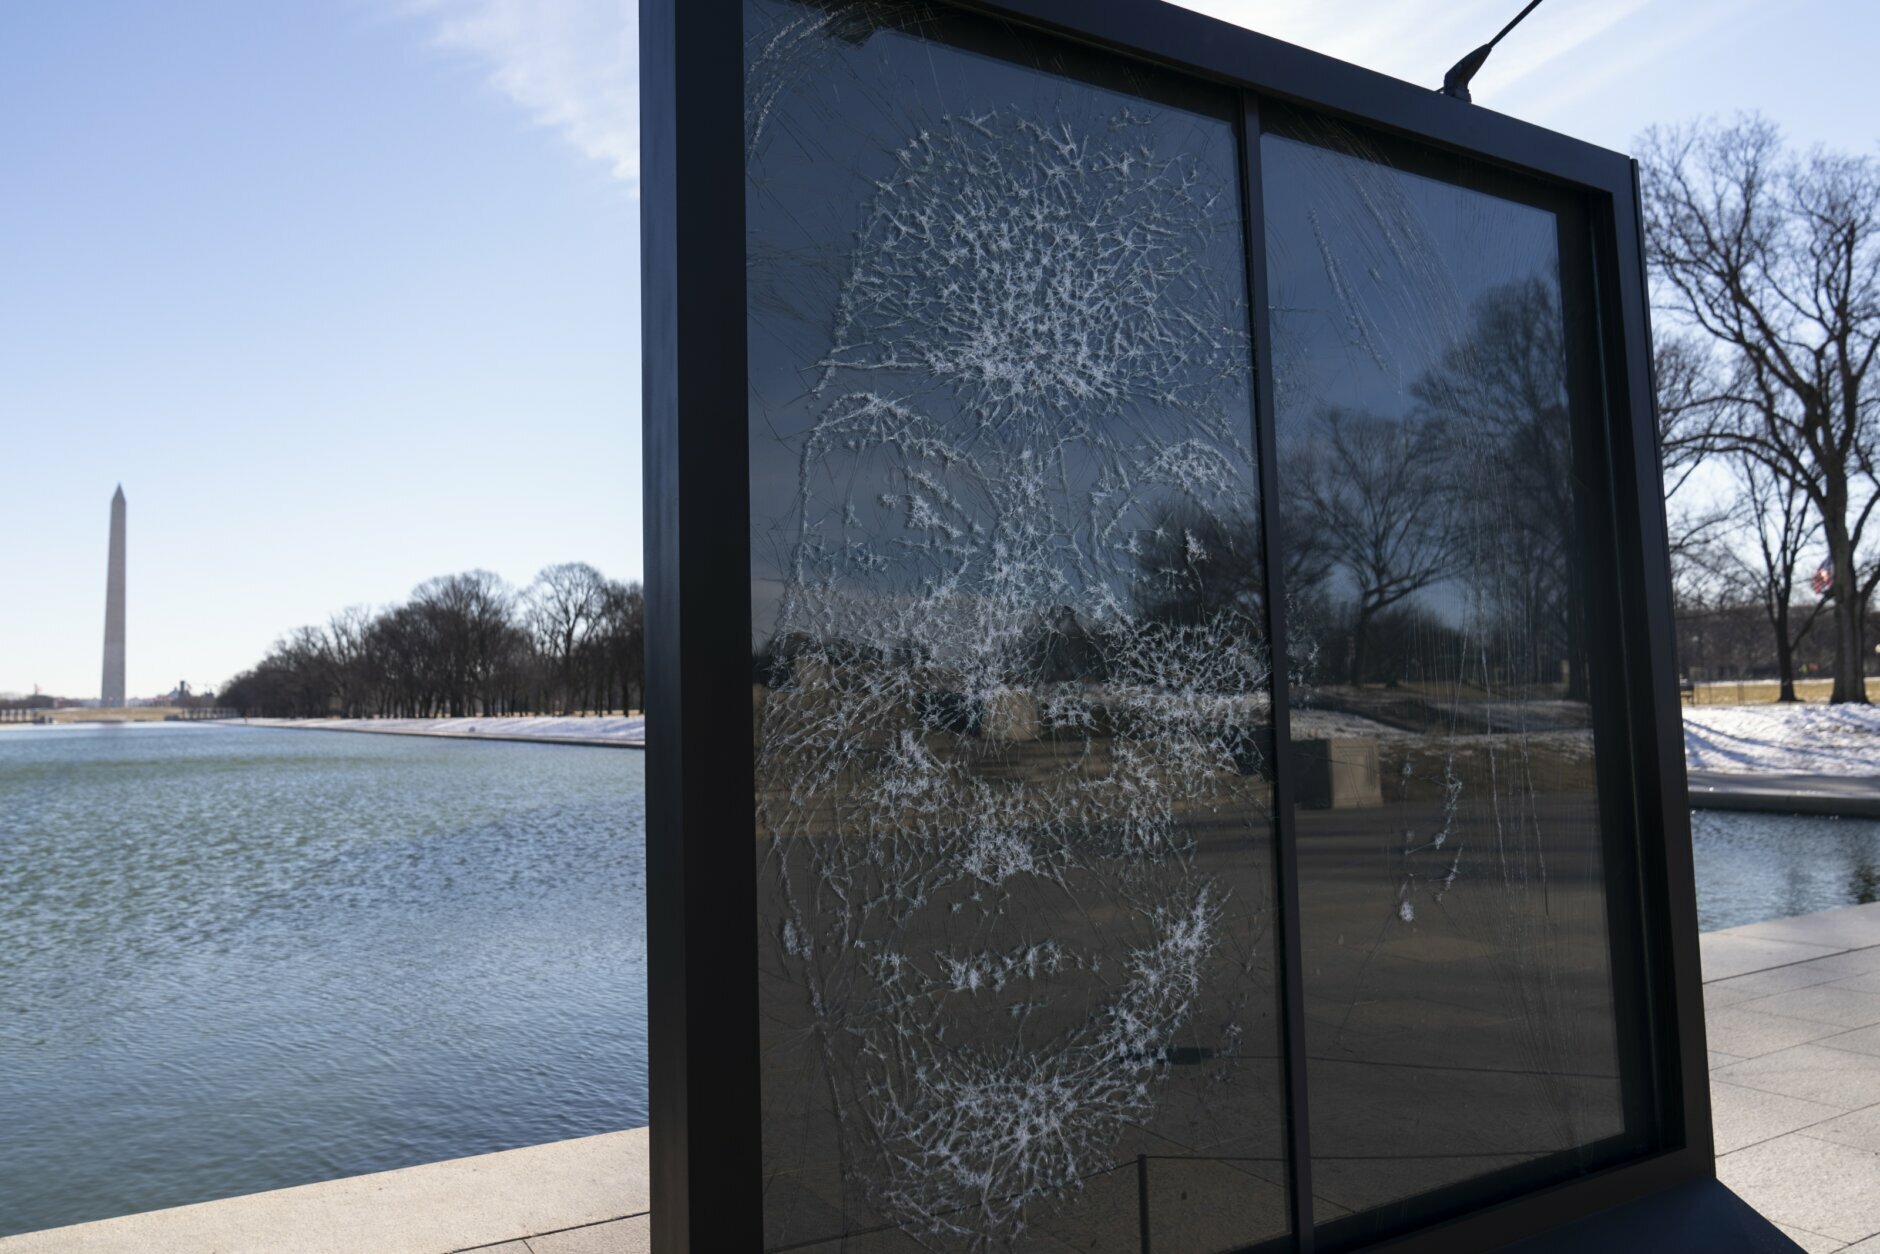 The installation "Vice President Kamala Harris Glass Ceiling Breaker" is seen at the Lincoln Memorial in Washington, Wednesday, Feb. 4, 2021. Vice President Kamala Harris' barrier-breaking career has been memorialized in a portrait depicting her face emerging from the cracks in a massive sheet of glass. Using a photo of Harris that taken by photographer Celeste Sloman, artist Simon Berger lightly hammered on the slab of laminated glass to create the portrait of Harris. The Washington Monument is seen in the distance and the Lincoln Memorial is reflected. (AP Photo/Carolyn Kaster)